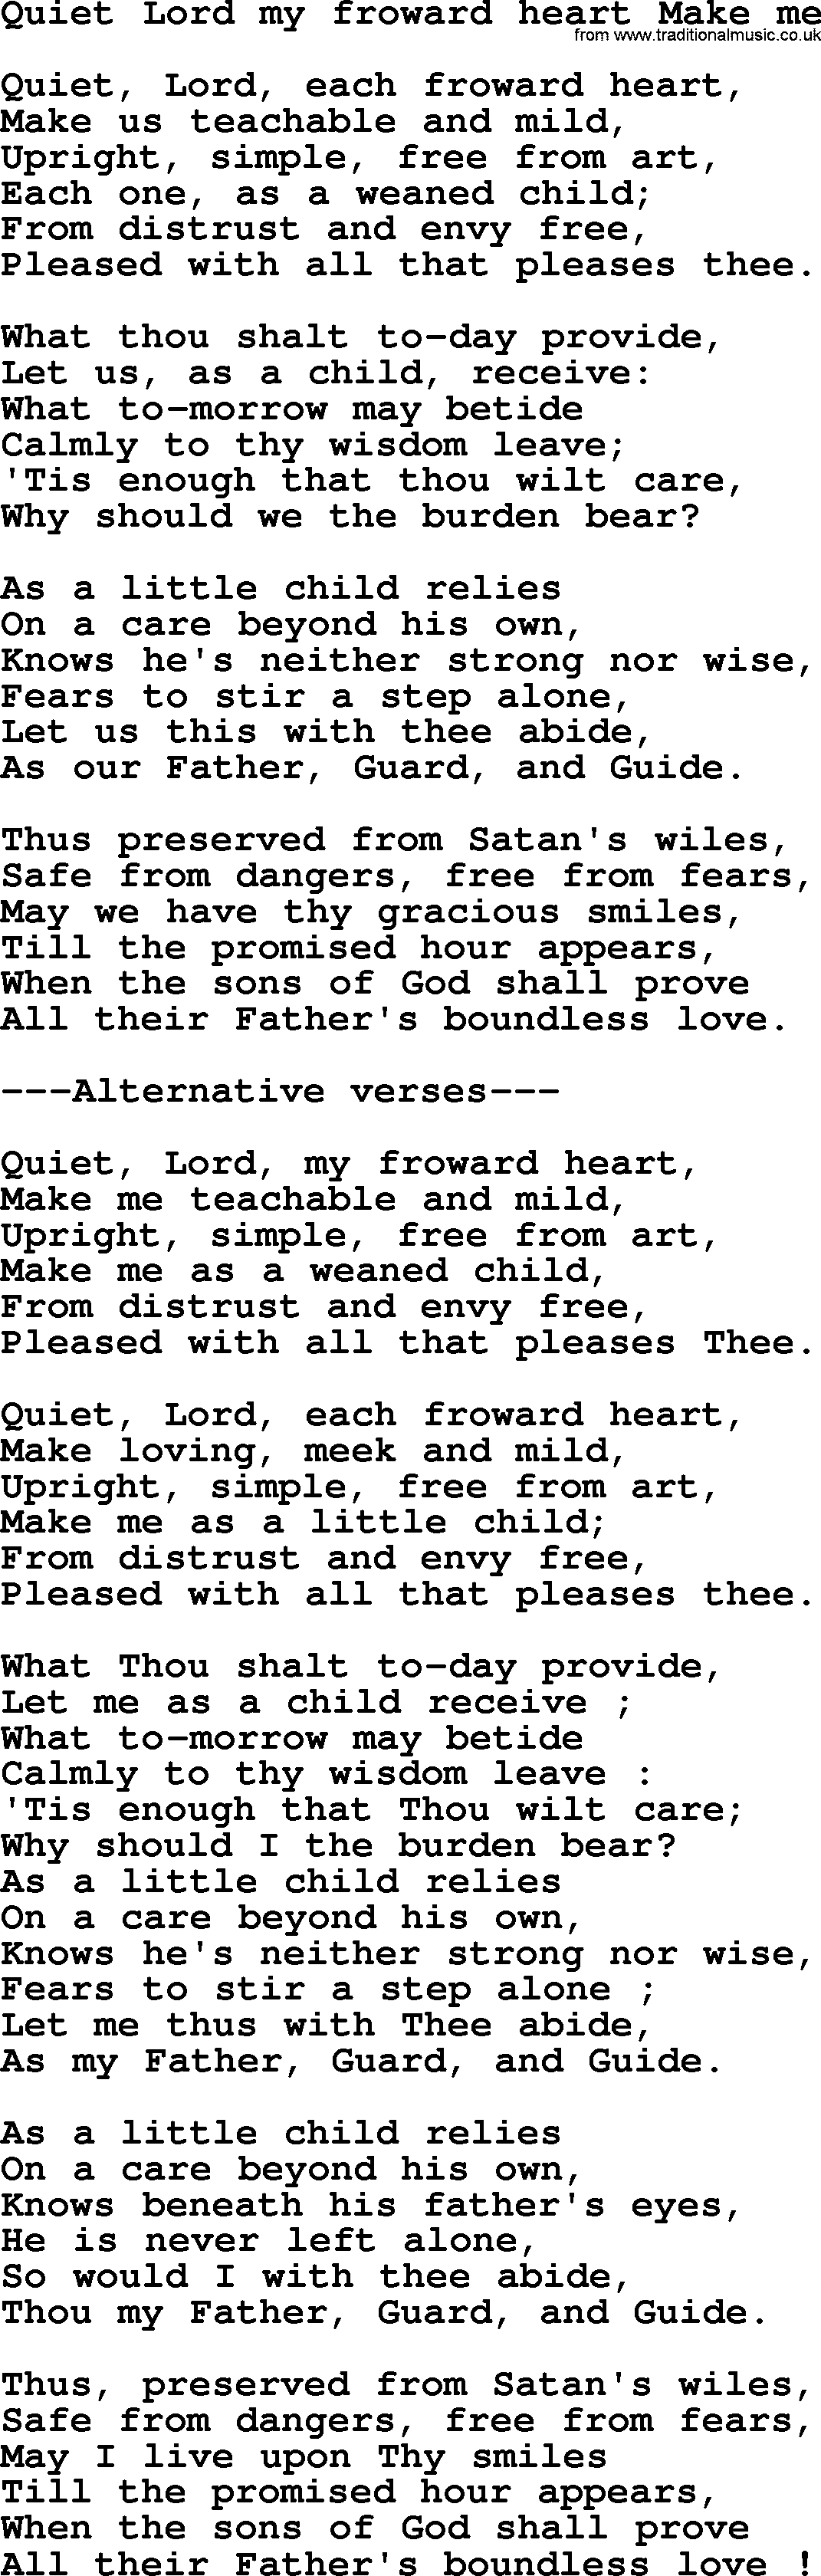 Sacred Songs and Solos complete, 1200 Hymns, title: Quiet Lord My Froward Heart Make Me, lyrics and PDF